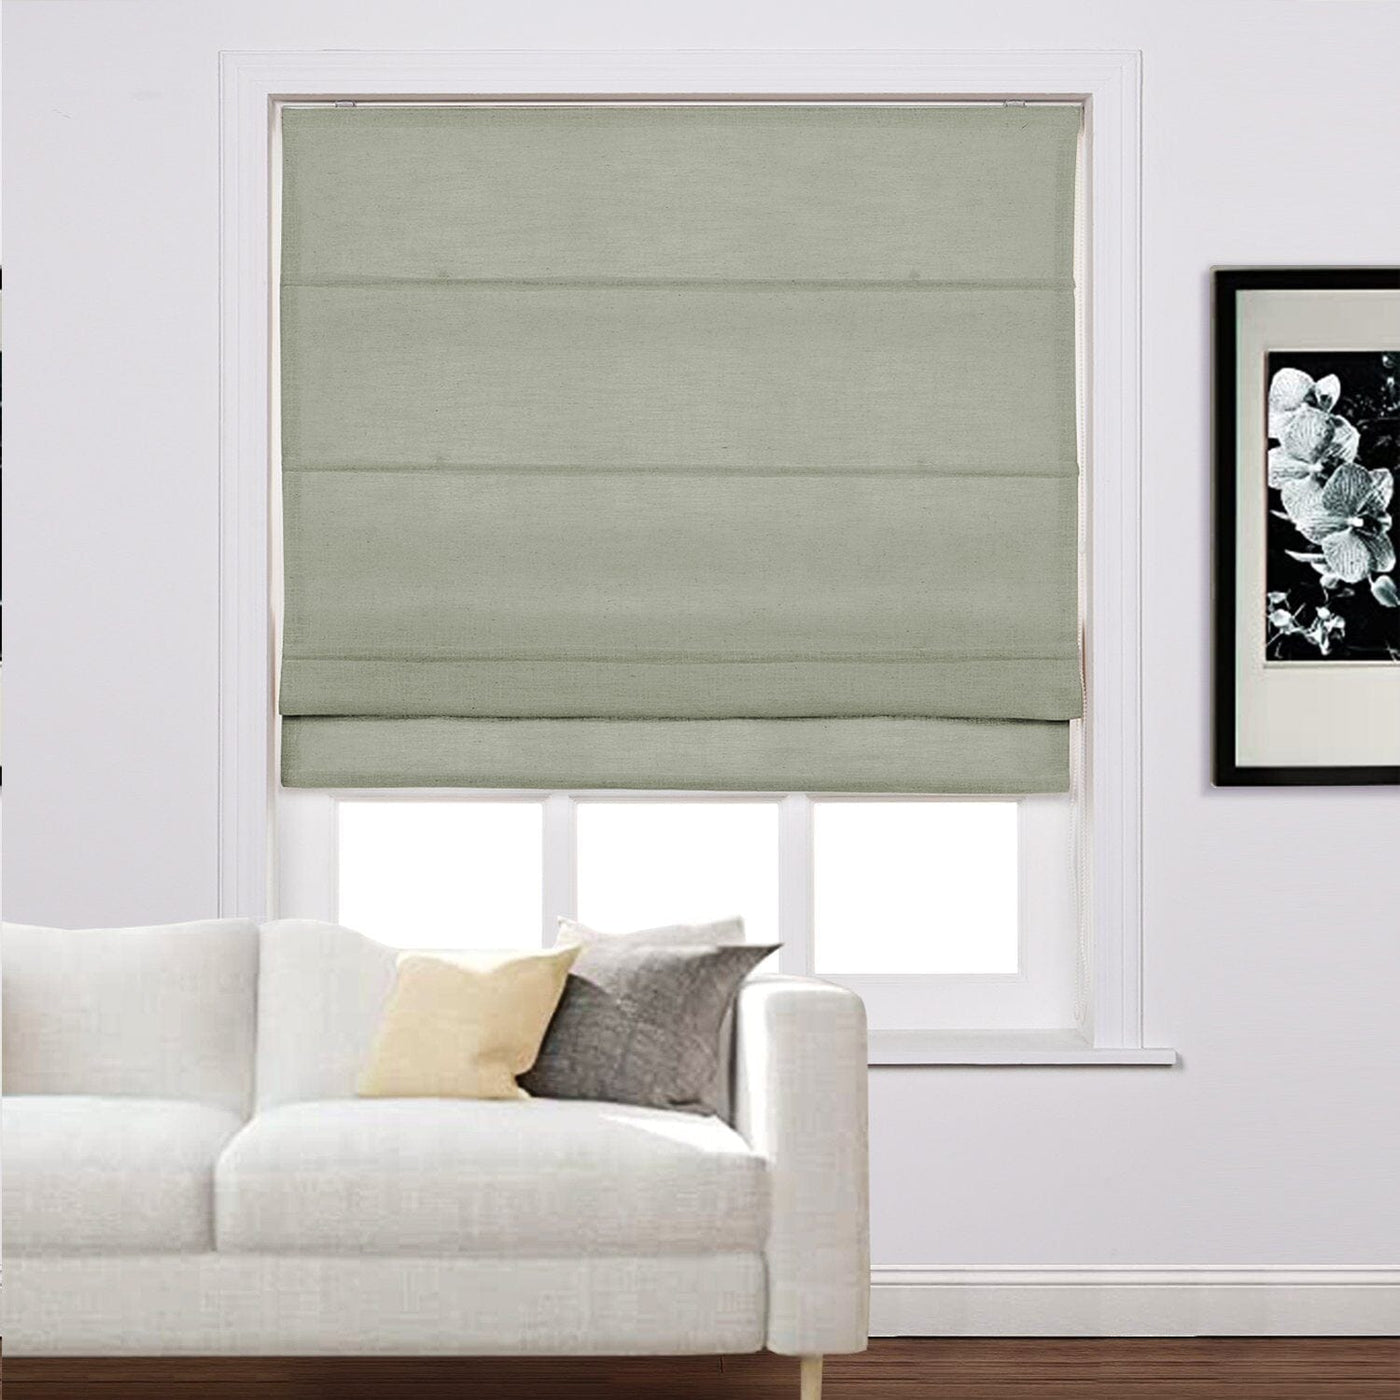 LIZ Linen Customized Roman Shade, Canvas Roman Shade with Loop Control, Kitchen Window Door Roman Shade, Install Hardware Included TWOPAGES CURTAINS Light Gray 1908-11 